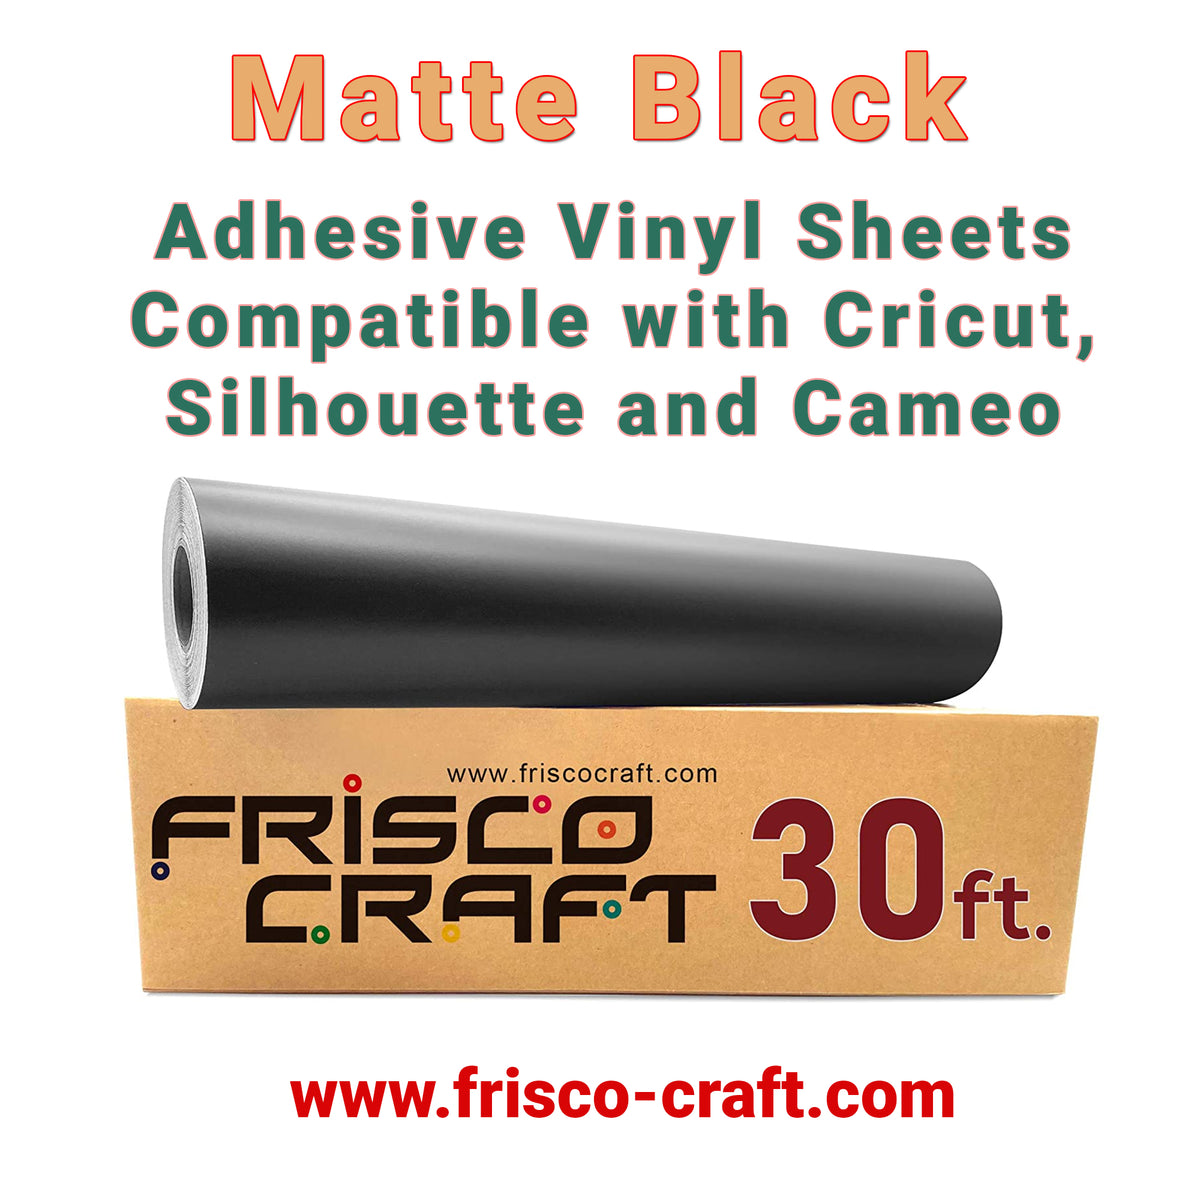 Frisco Craft Matte Black Permanent Vinyl - 12 x 50 ft Black Vinyl Roll, Adhesive Vinyl Sheets Compatible with Cricut, Silhouette and Cameo